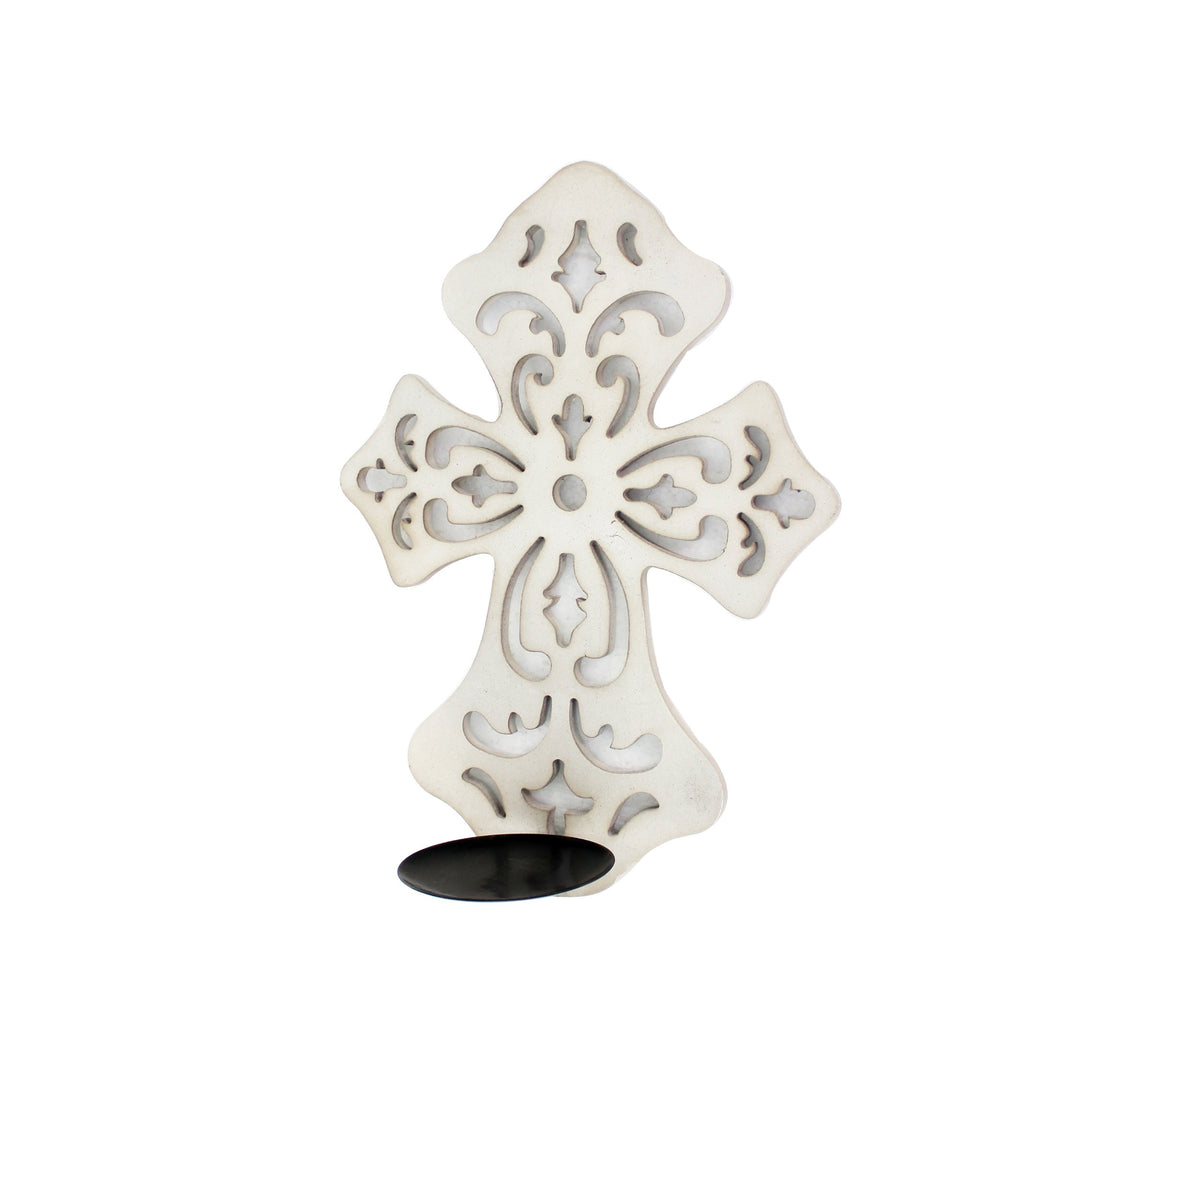 Cross Shaped Wooden Candle Holder with Scrolled Engravings, White - BM211079